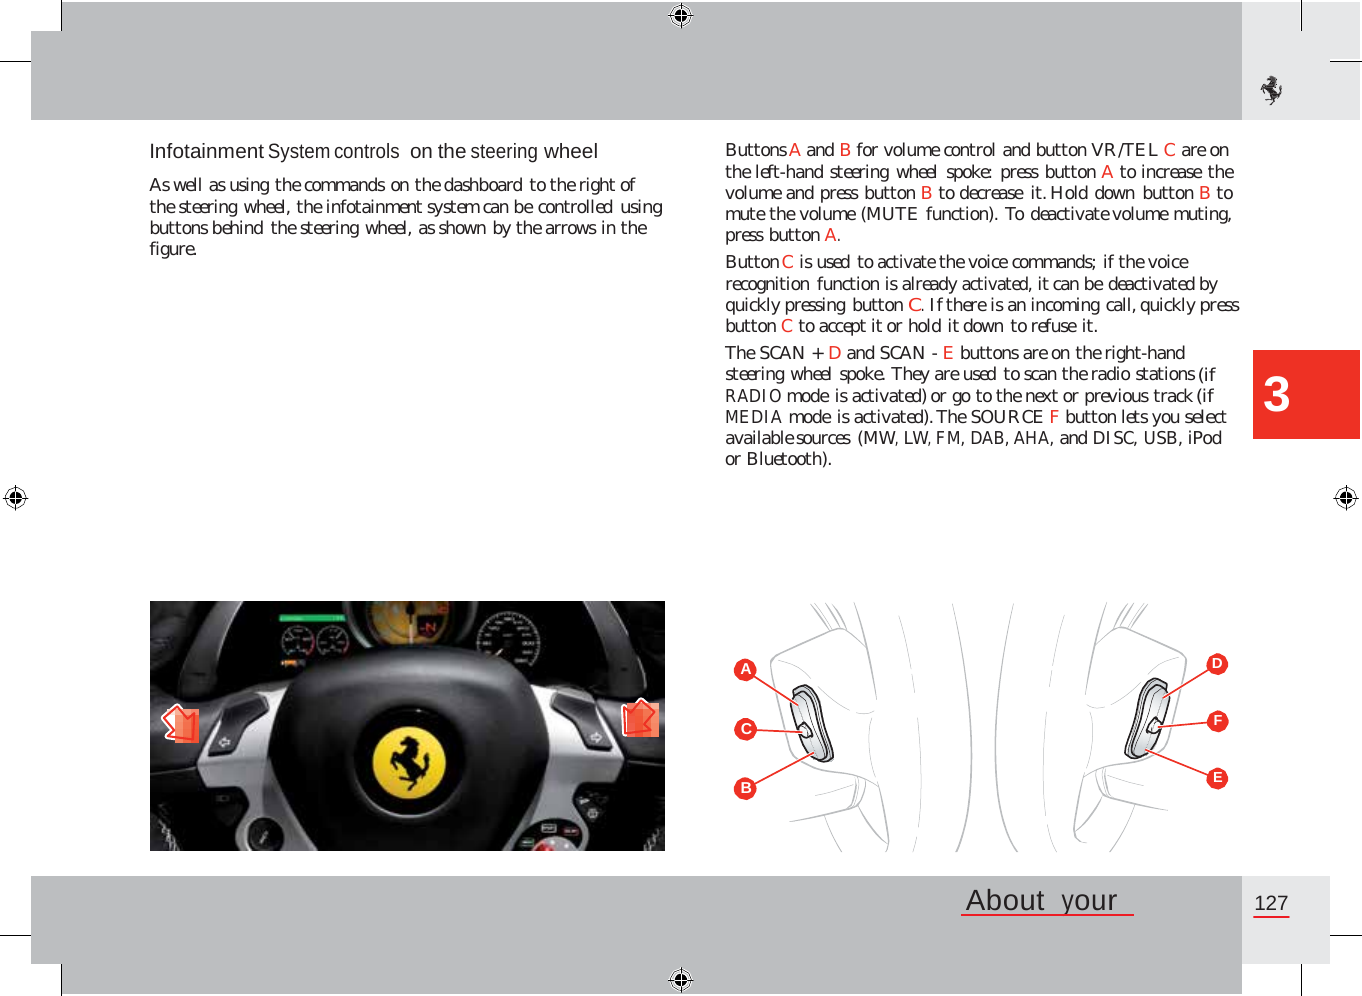 Infotainment System controls on the steering wheel  As well as using the commands on the dashboard to the right of the steering wheel, the infotainment system can be controlled using buttons behind the steering wheel, as shown by the arrows in the figure. Buttons A and B for volume control and button VR/TEL C are on the left-hand steering wheel spoke: press button A to increase the volume and press button B to decrease it. Hold down button B to mute the volume (MUTE function). To deactivate volume muting, press button A. Button C is used to activate the voice commands; if the voice recognition function is already activated, it can be deactivated by quickly pressing button C. If there is an incoming call, quickly press button C to accept it or hold it down to refuse it. The SCAN + D and SCAN - E buttons are on the right-hand steering wheel spoke. They are used to scan the radio stations (if RADIO mode is activated) or go to the next or previous track (if MEDIA mode is activated). The SOURCE F button lets you select available sources (MW, LW, FM, DAB, AHA, and DISC, USB, iPod or Bluetooth). 3 D A F C E B  About  your   127              